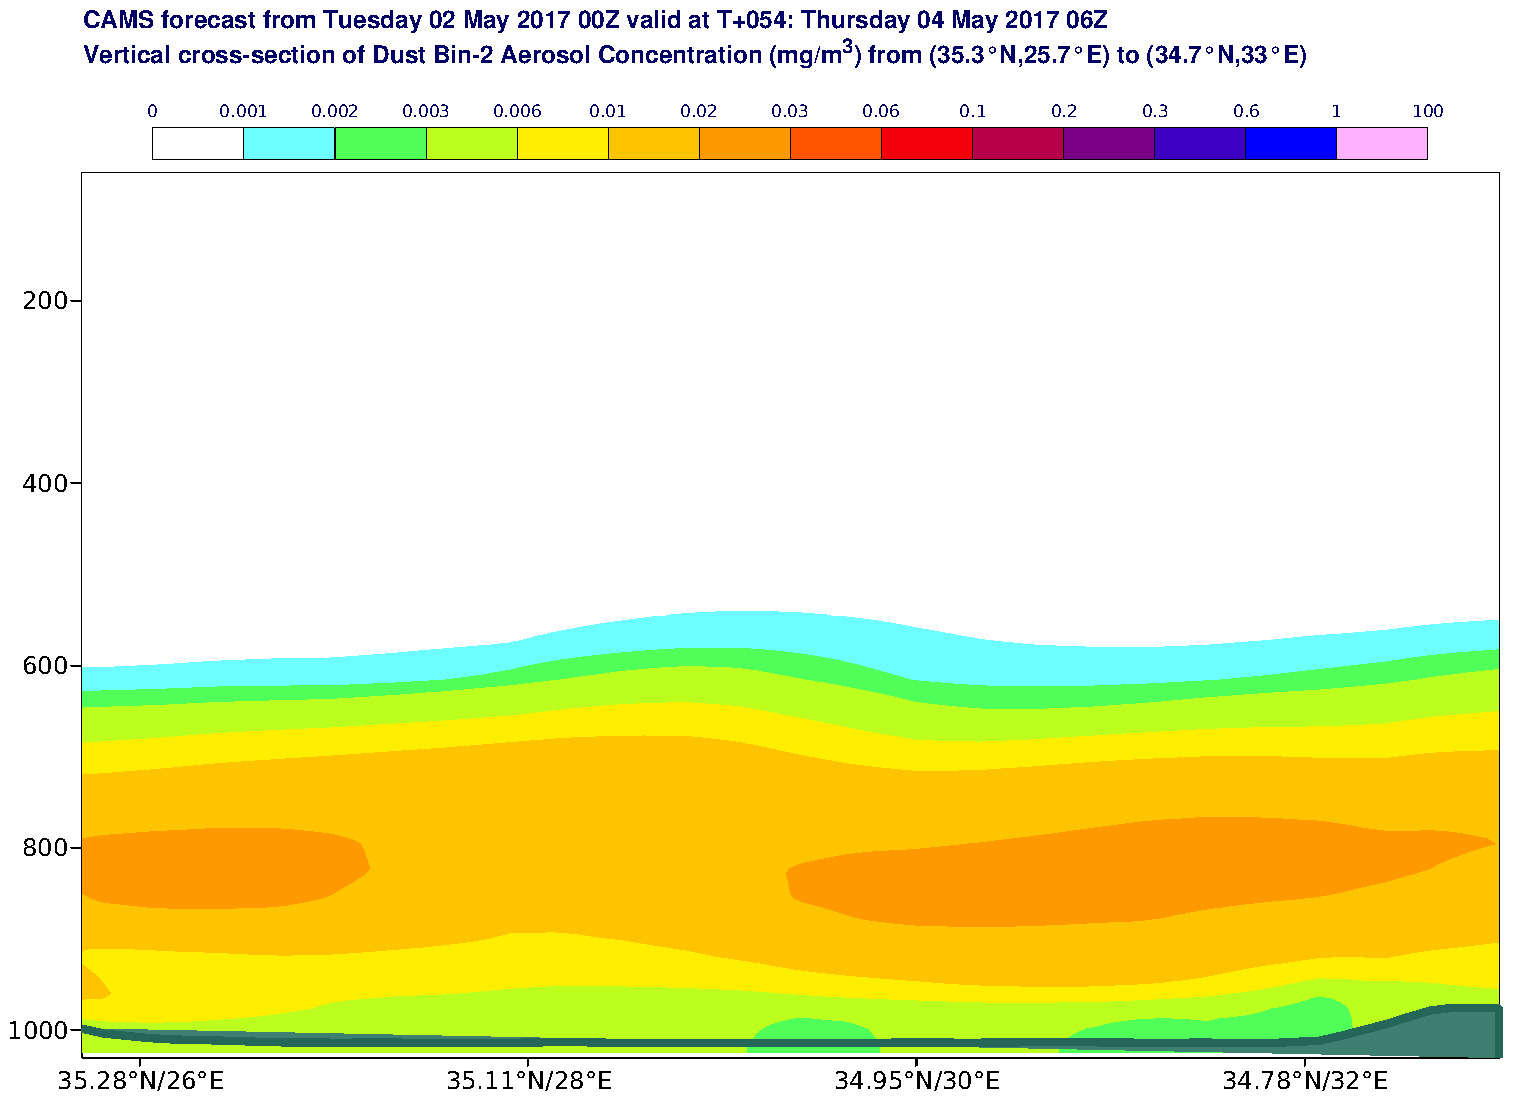 Vertical cross-section of Dust Bin-2 Aerosol Concentration (mg/m3) valid at T54 - 2017-05-04 06:00